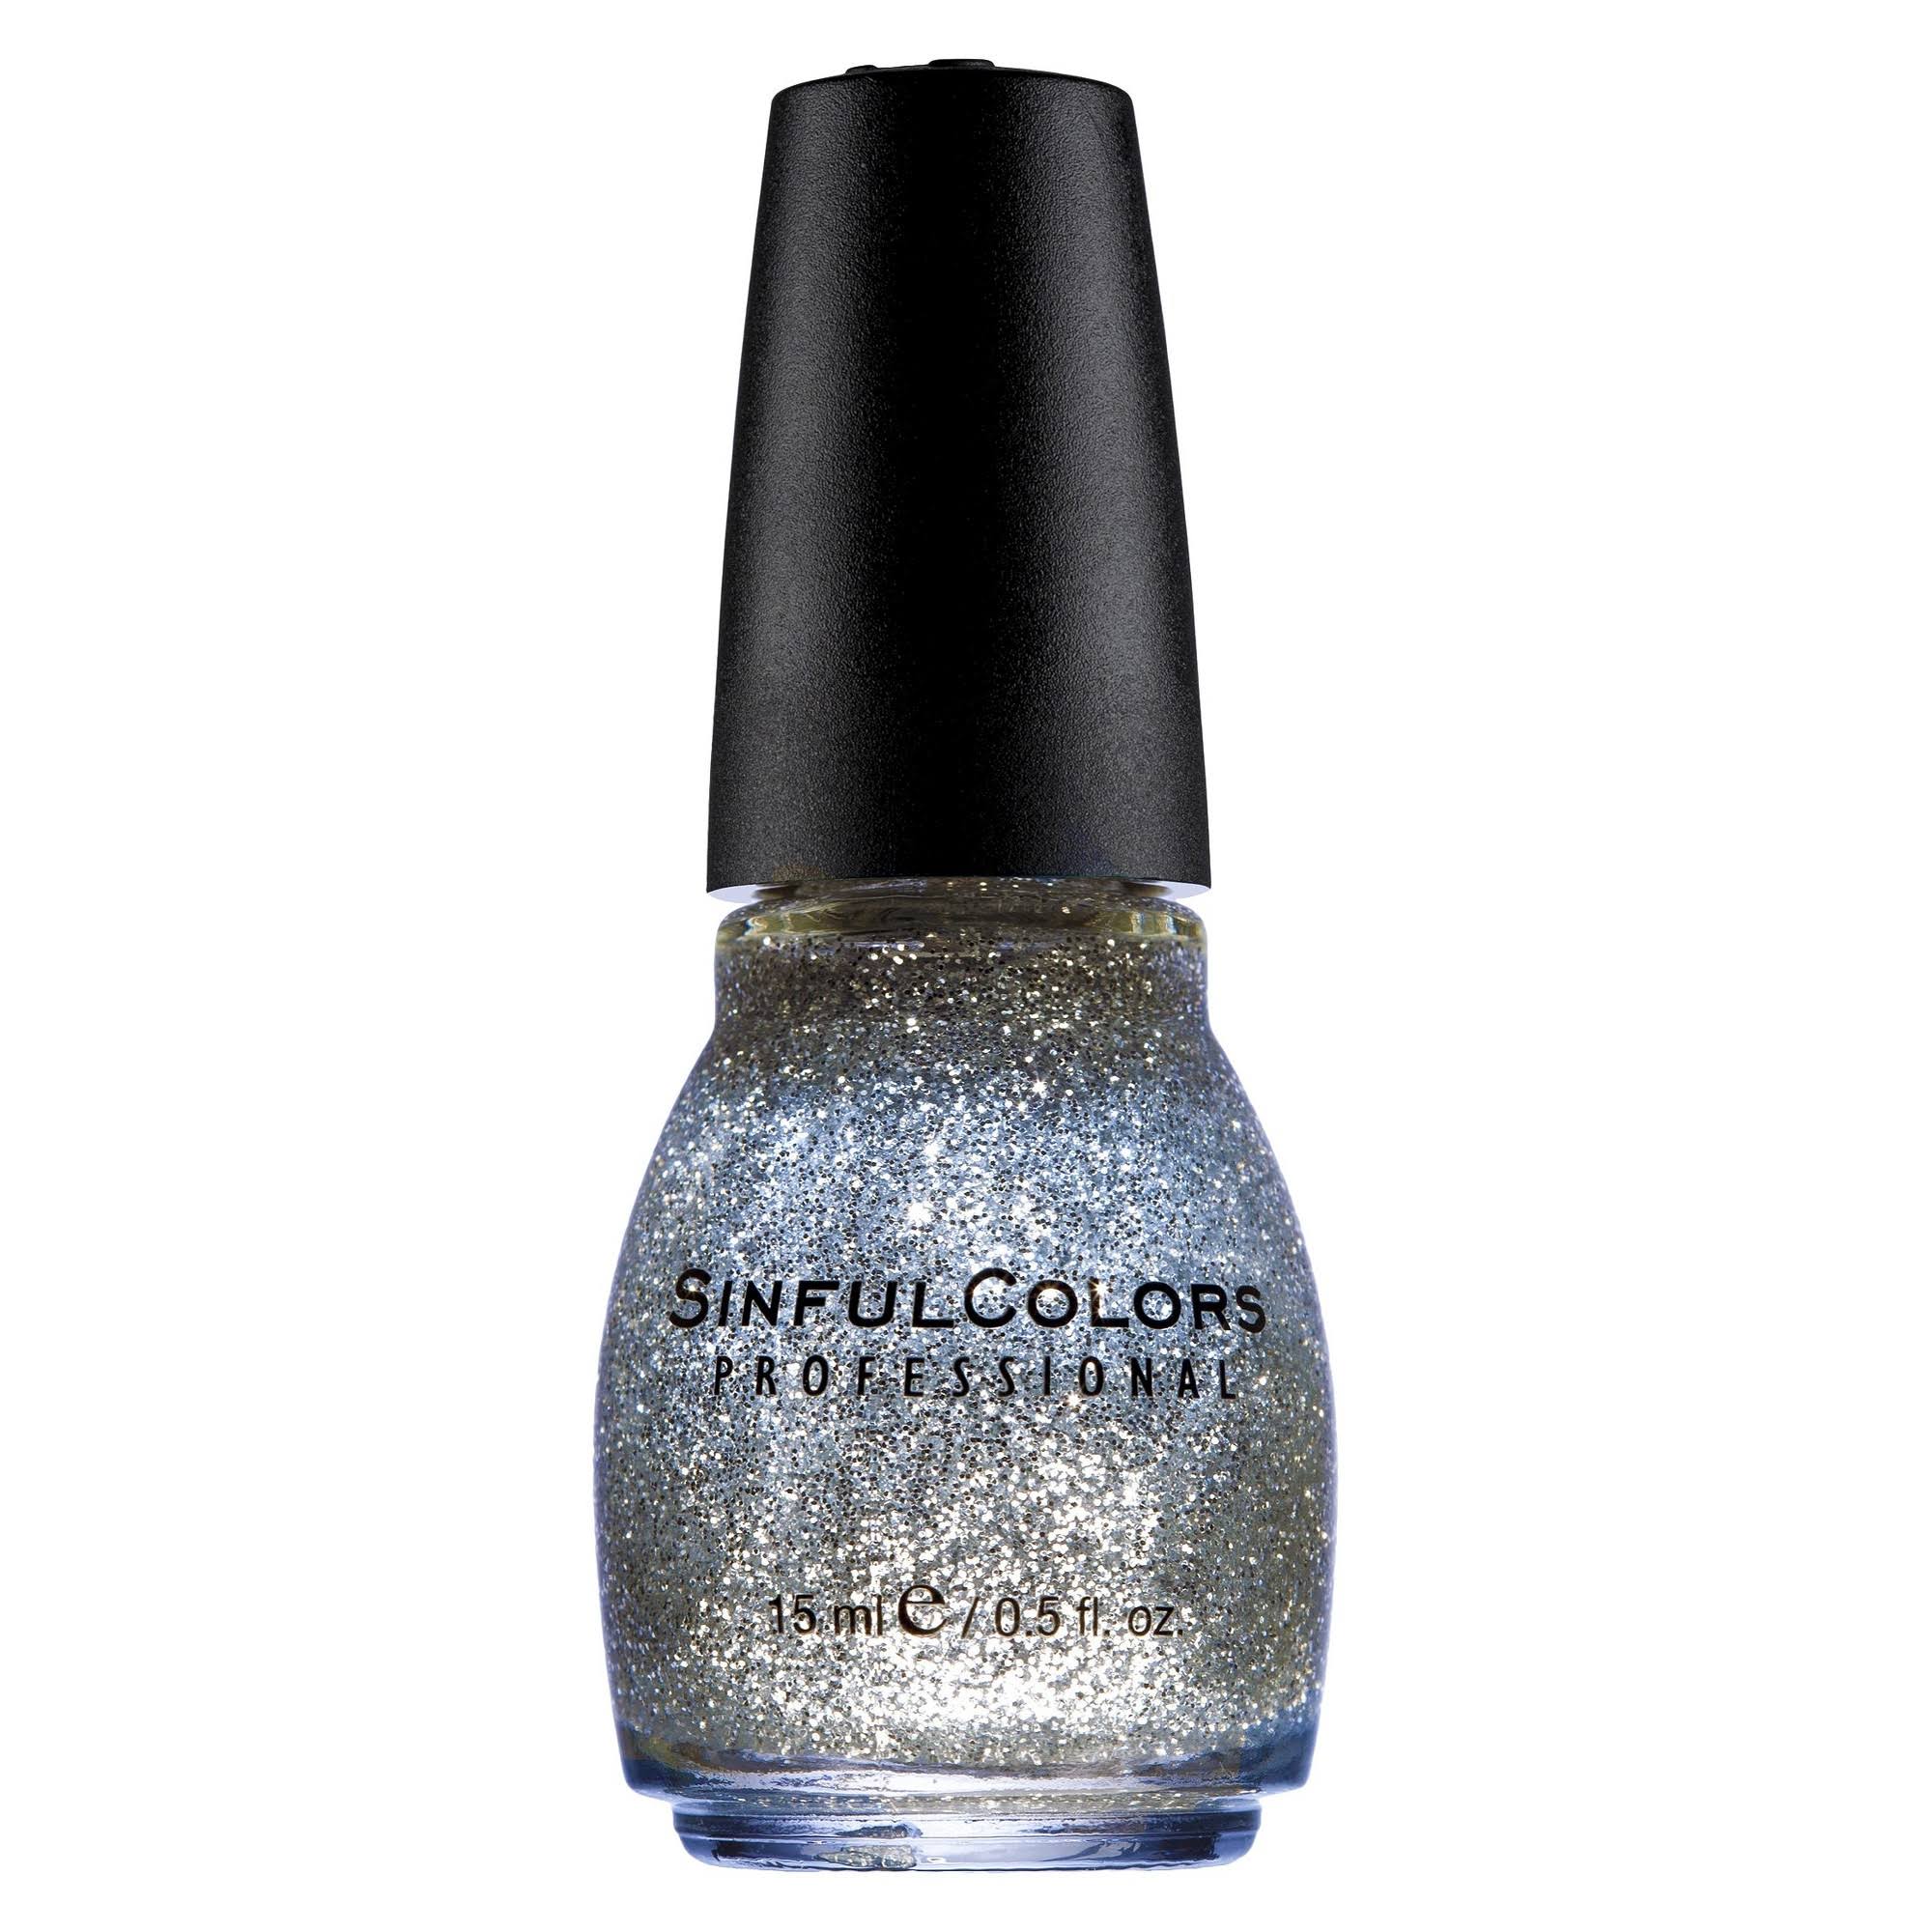 Sinful Colors Professional Nail Polish - Queen of Beauty, 0.5oz